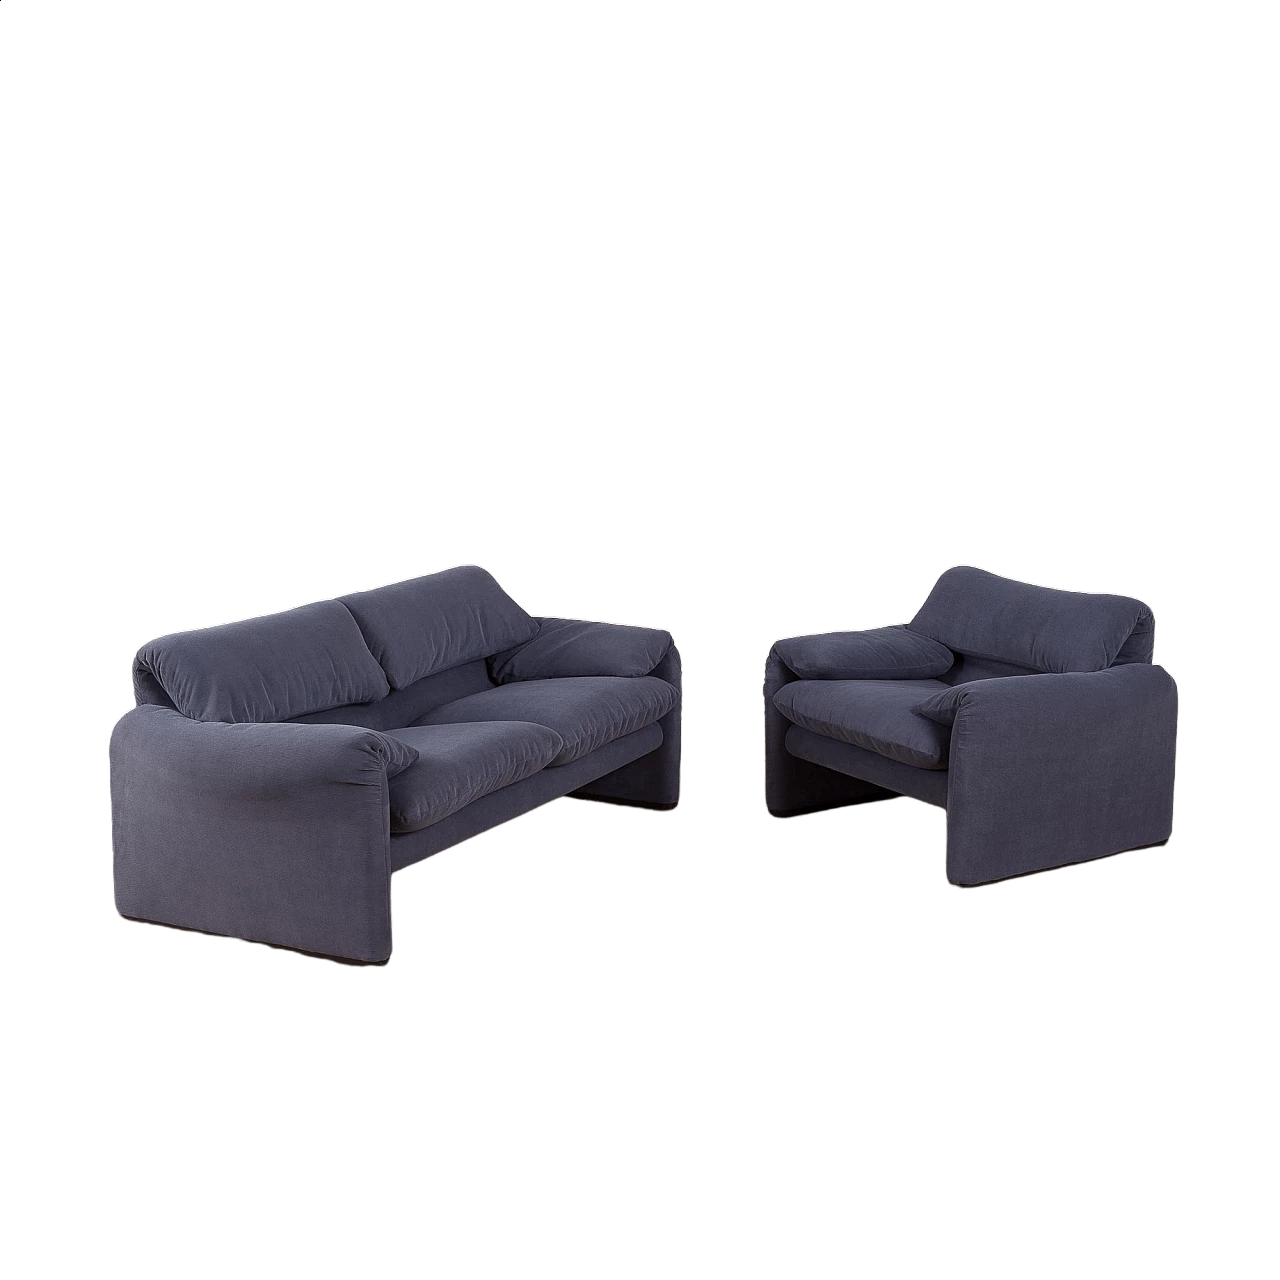 Maralunga sofa and armchair by Vico Magistretti for Cassina, 1980s 31